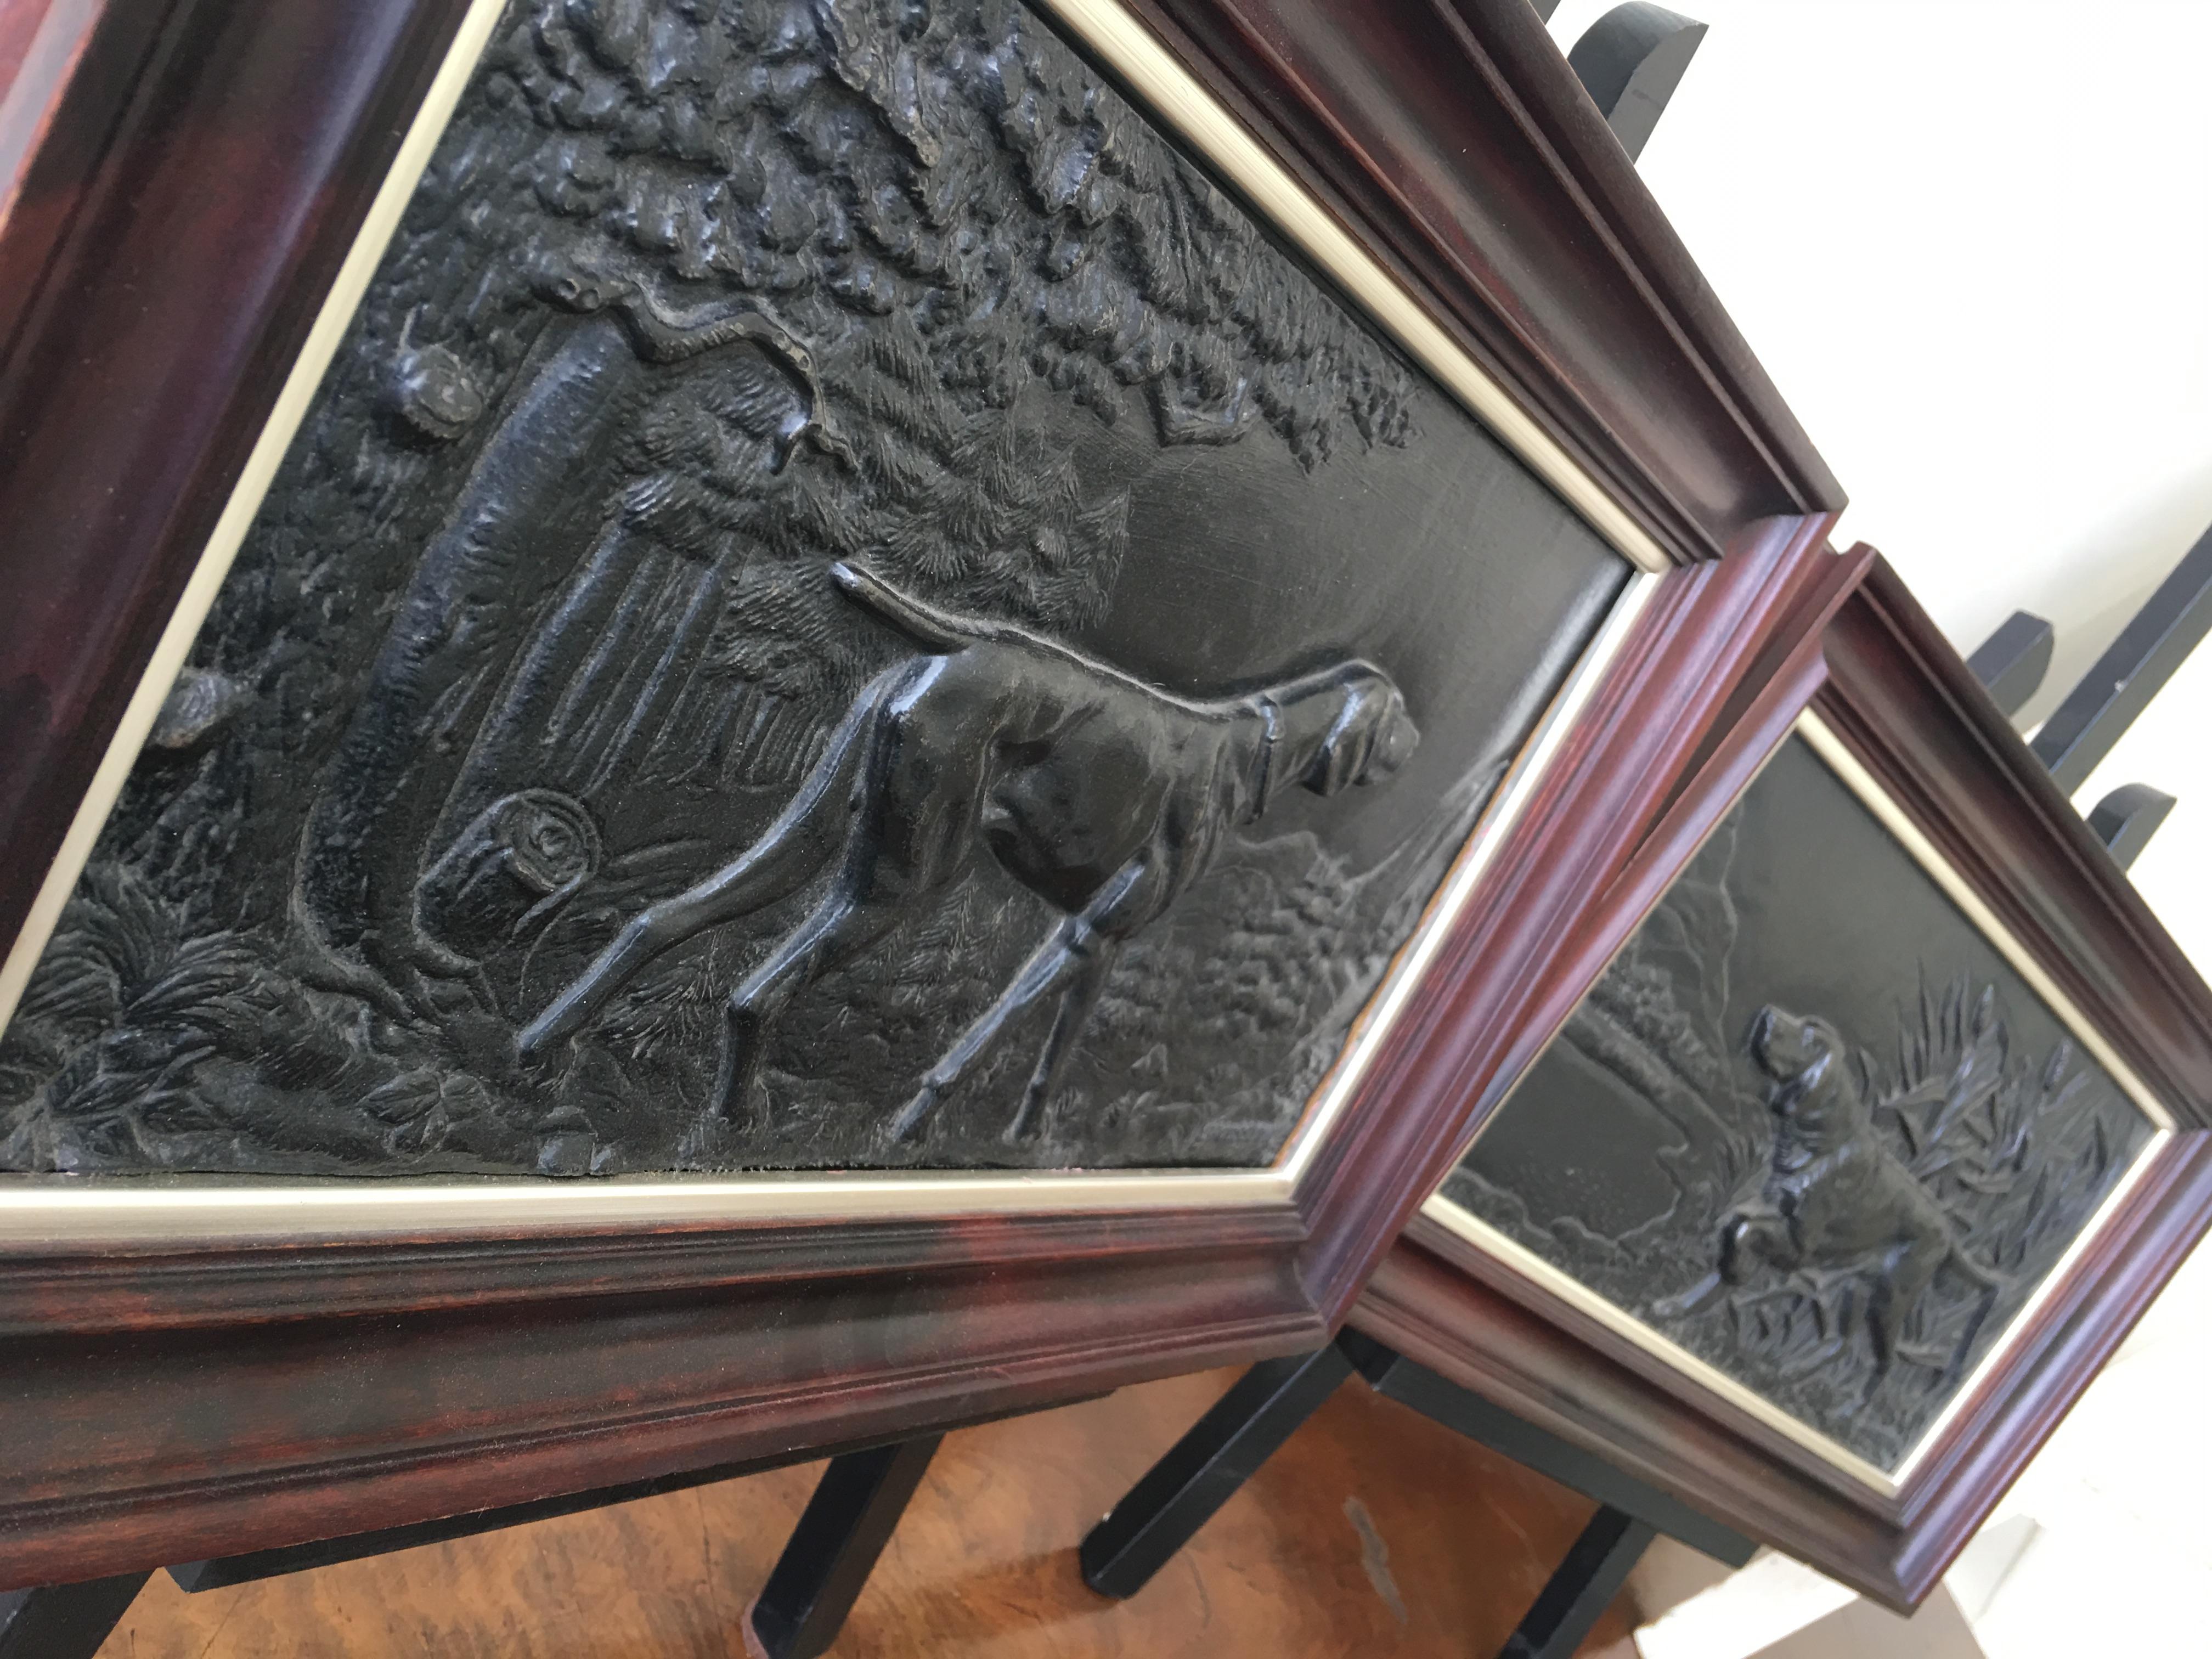 Pair of framed cast iron reliefs / plaques depicting hunting dogs in outside landscape, circa 1910.
From the French metal foundry town of Brousseval. Fantastic detail and craftsmanship. Frames can either be wall mounted, or they also stand